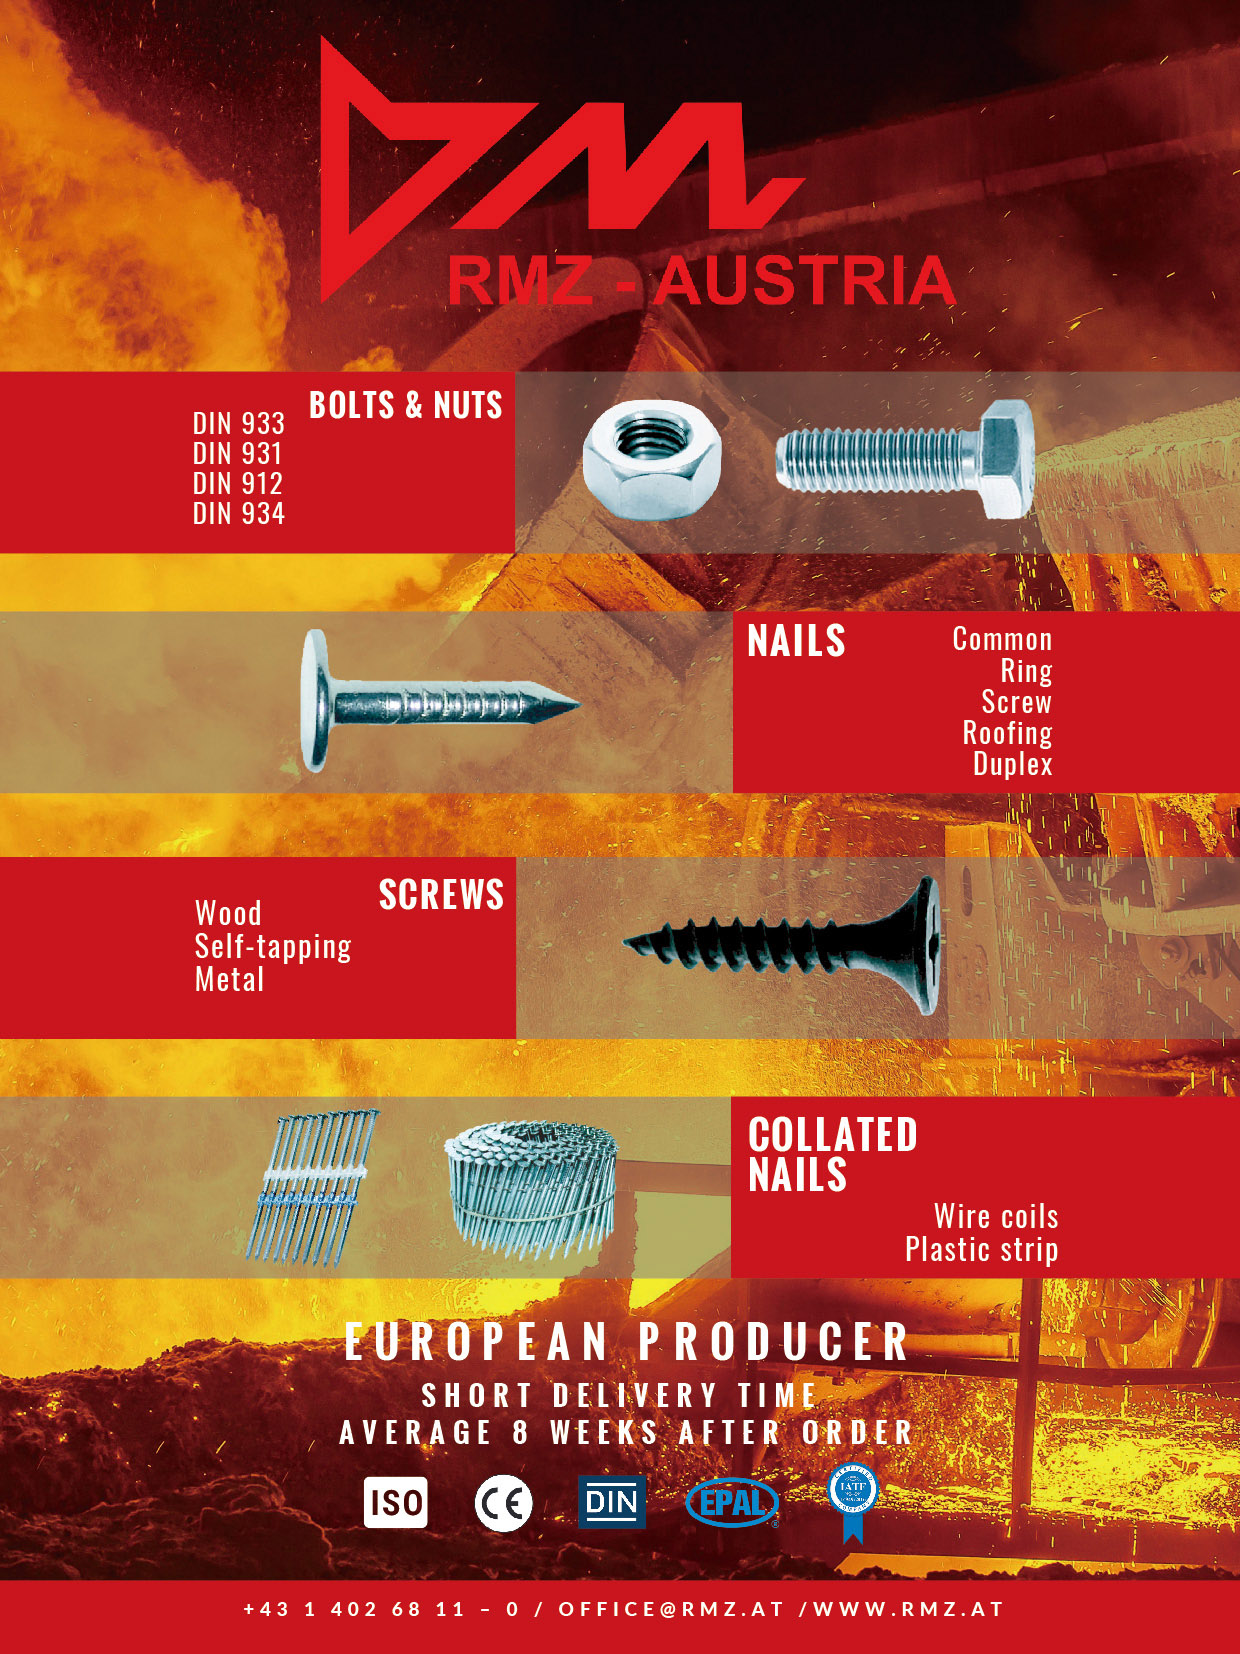 RMZ AUSTRIA , Bolts, Nuts, Nails, Screws, Collated Nails